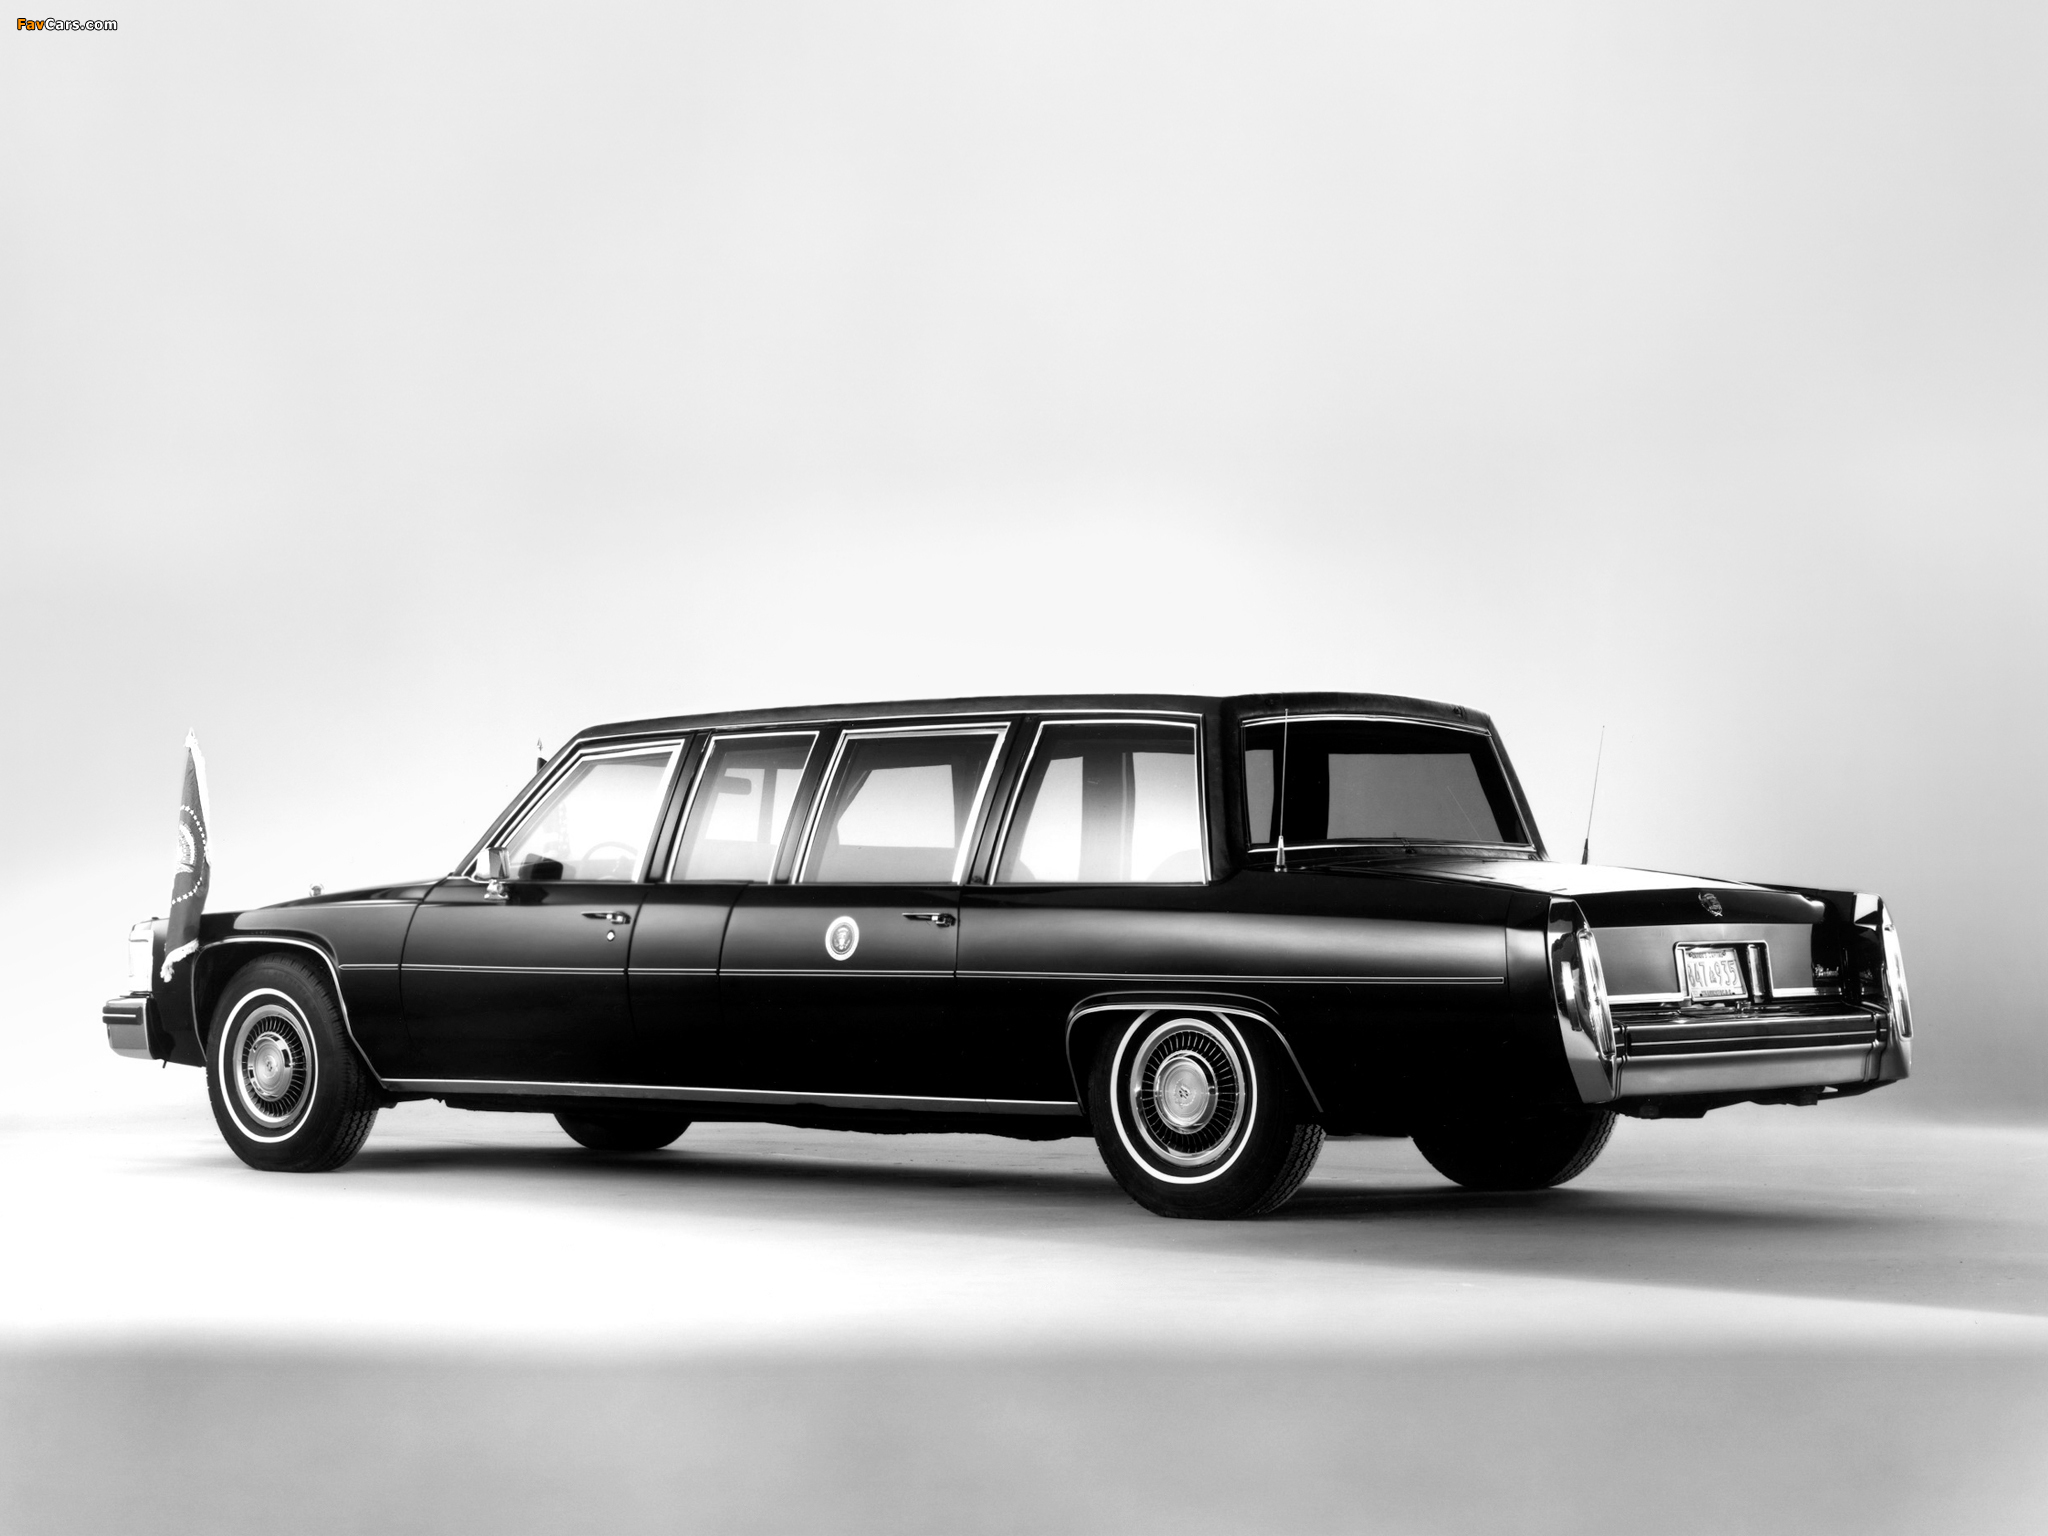 Images of Cadillac Fleetwood Presidential Limousine 1983 (2048 x 1536)